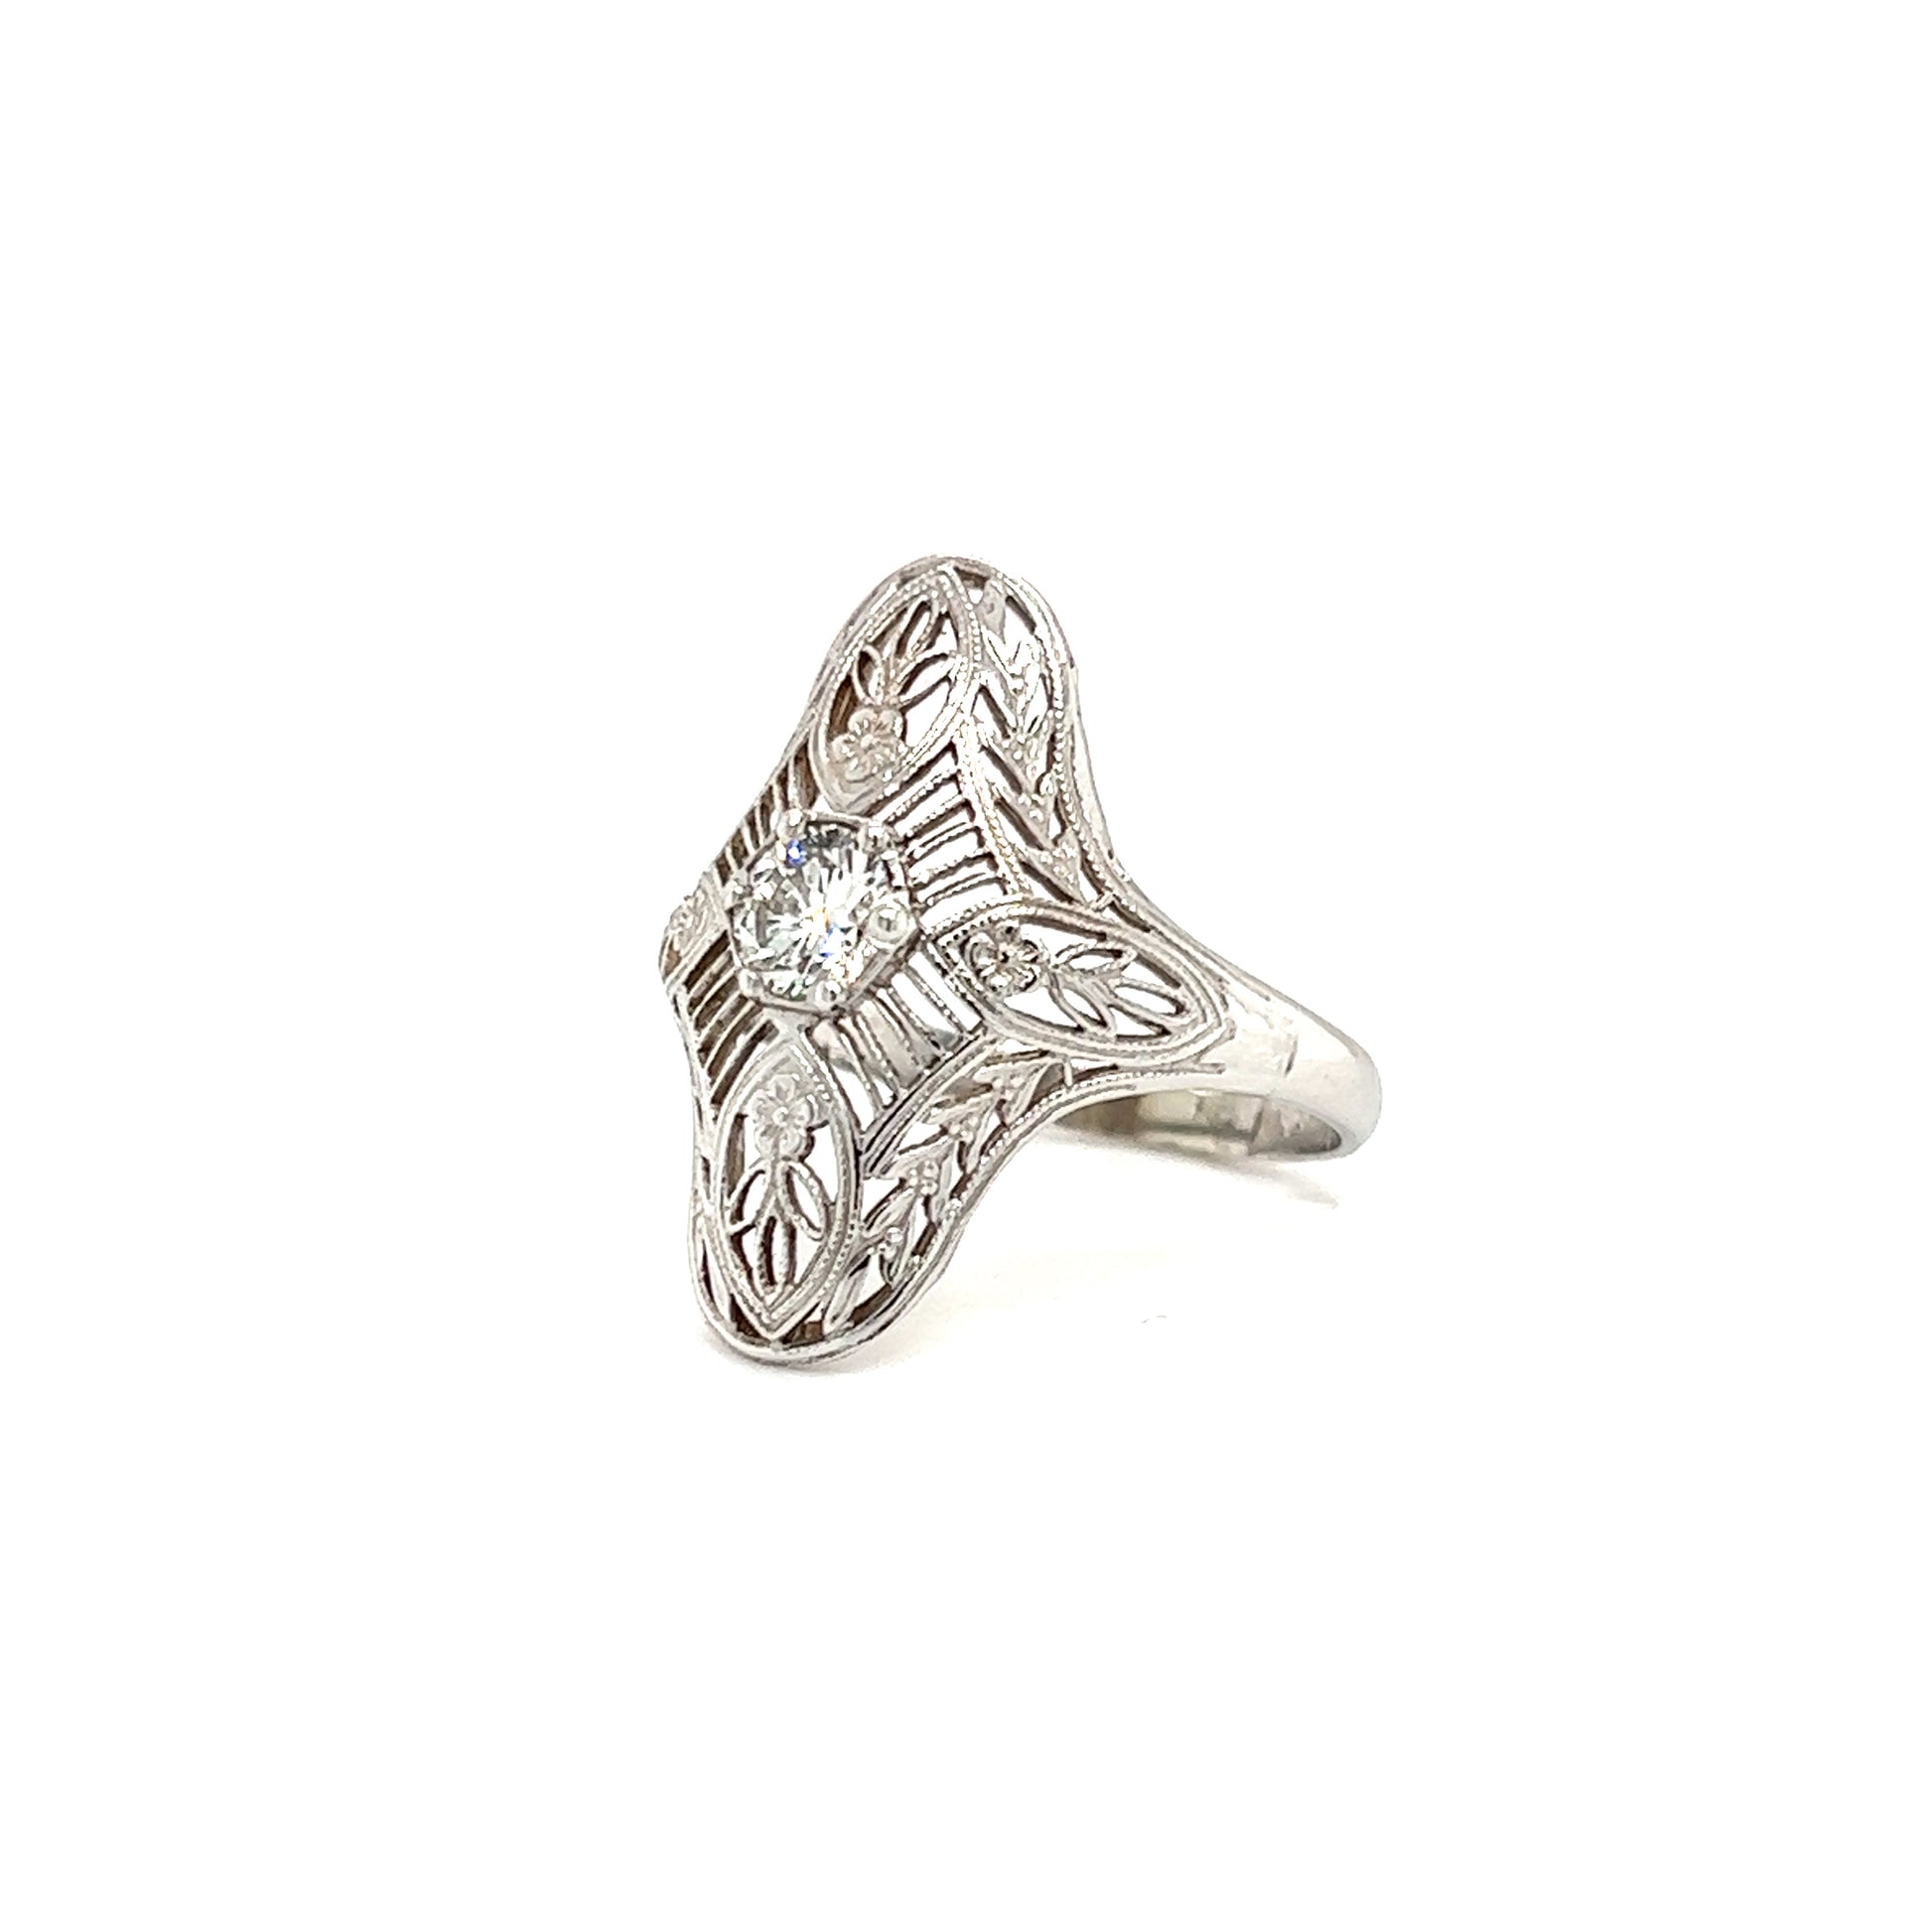 Round Diamond Ring with Filigree in 14K White Gold Right Side View